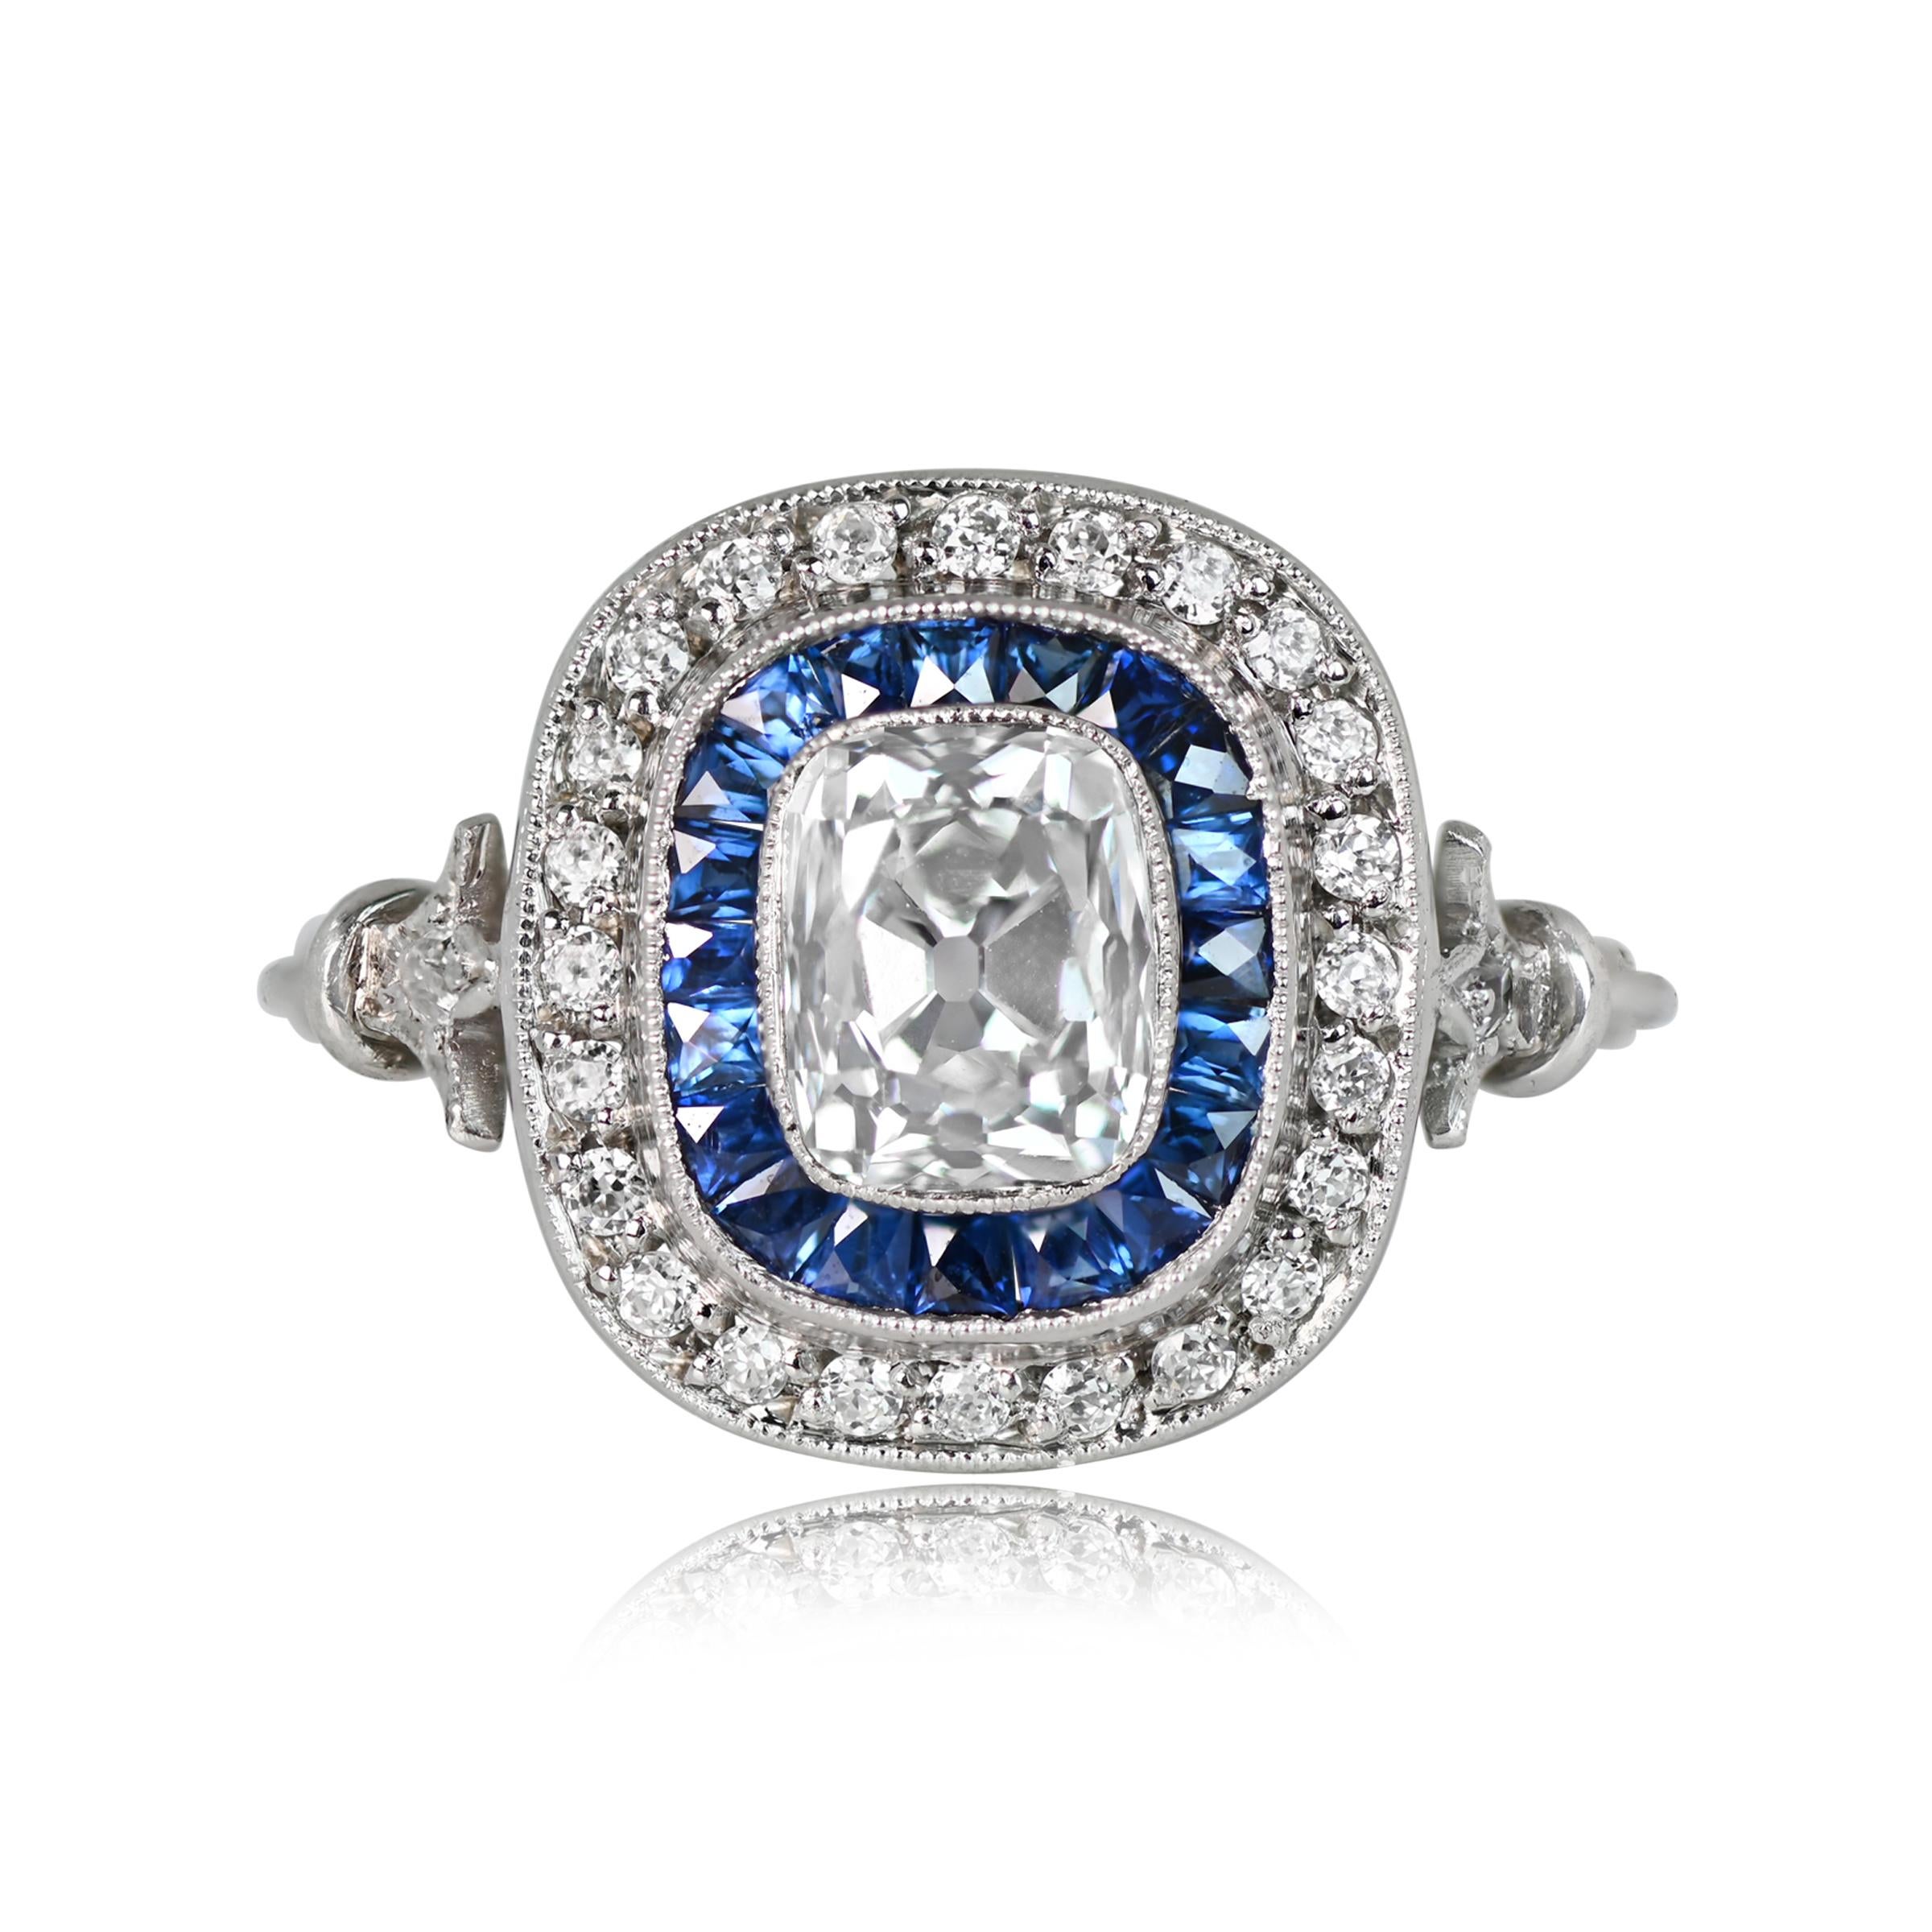 An exquisite hand-crafted platinum engagement ring features an elongated antique cushion cut diamond, approximately 1.07 carats. A double row of natural blue French cut sapphires and old European cut diamonds gracefully encircle the center stone.